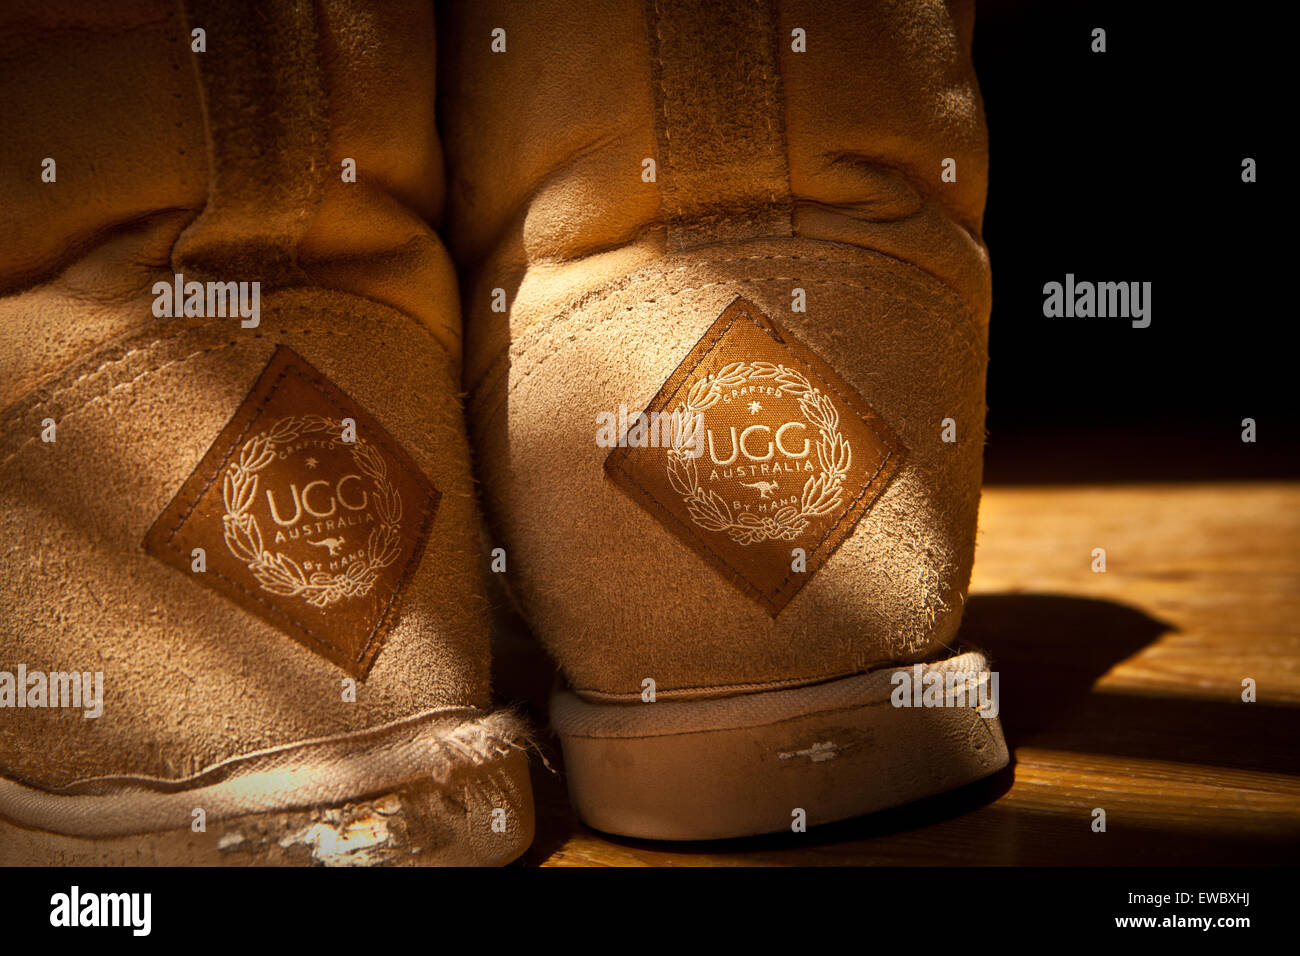 Ugg Boots in the sunlight Stock Photo